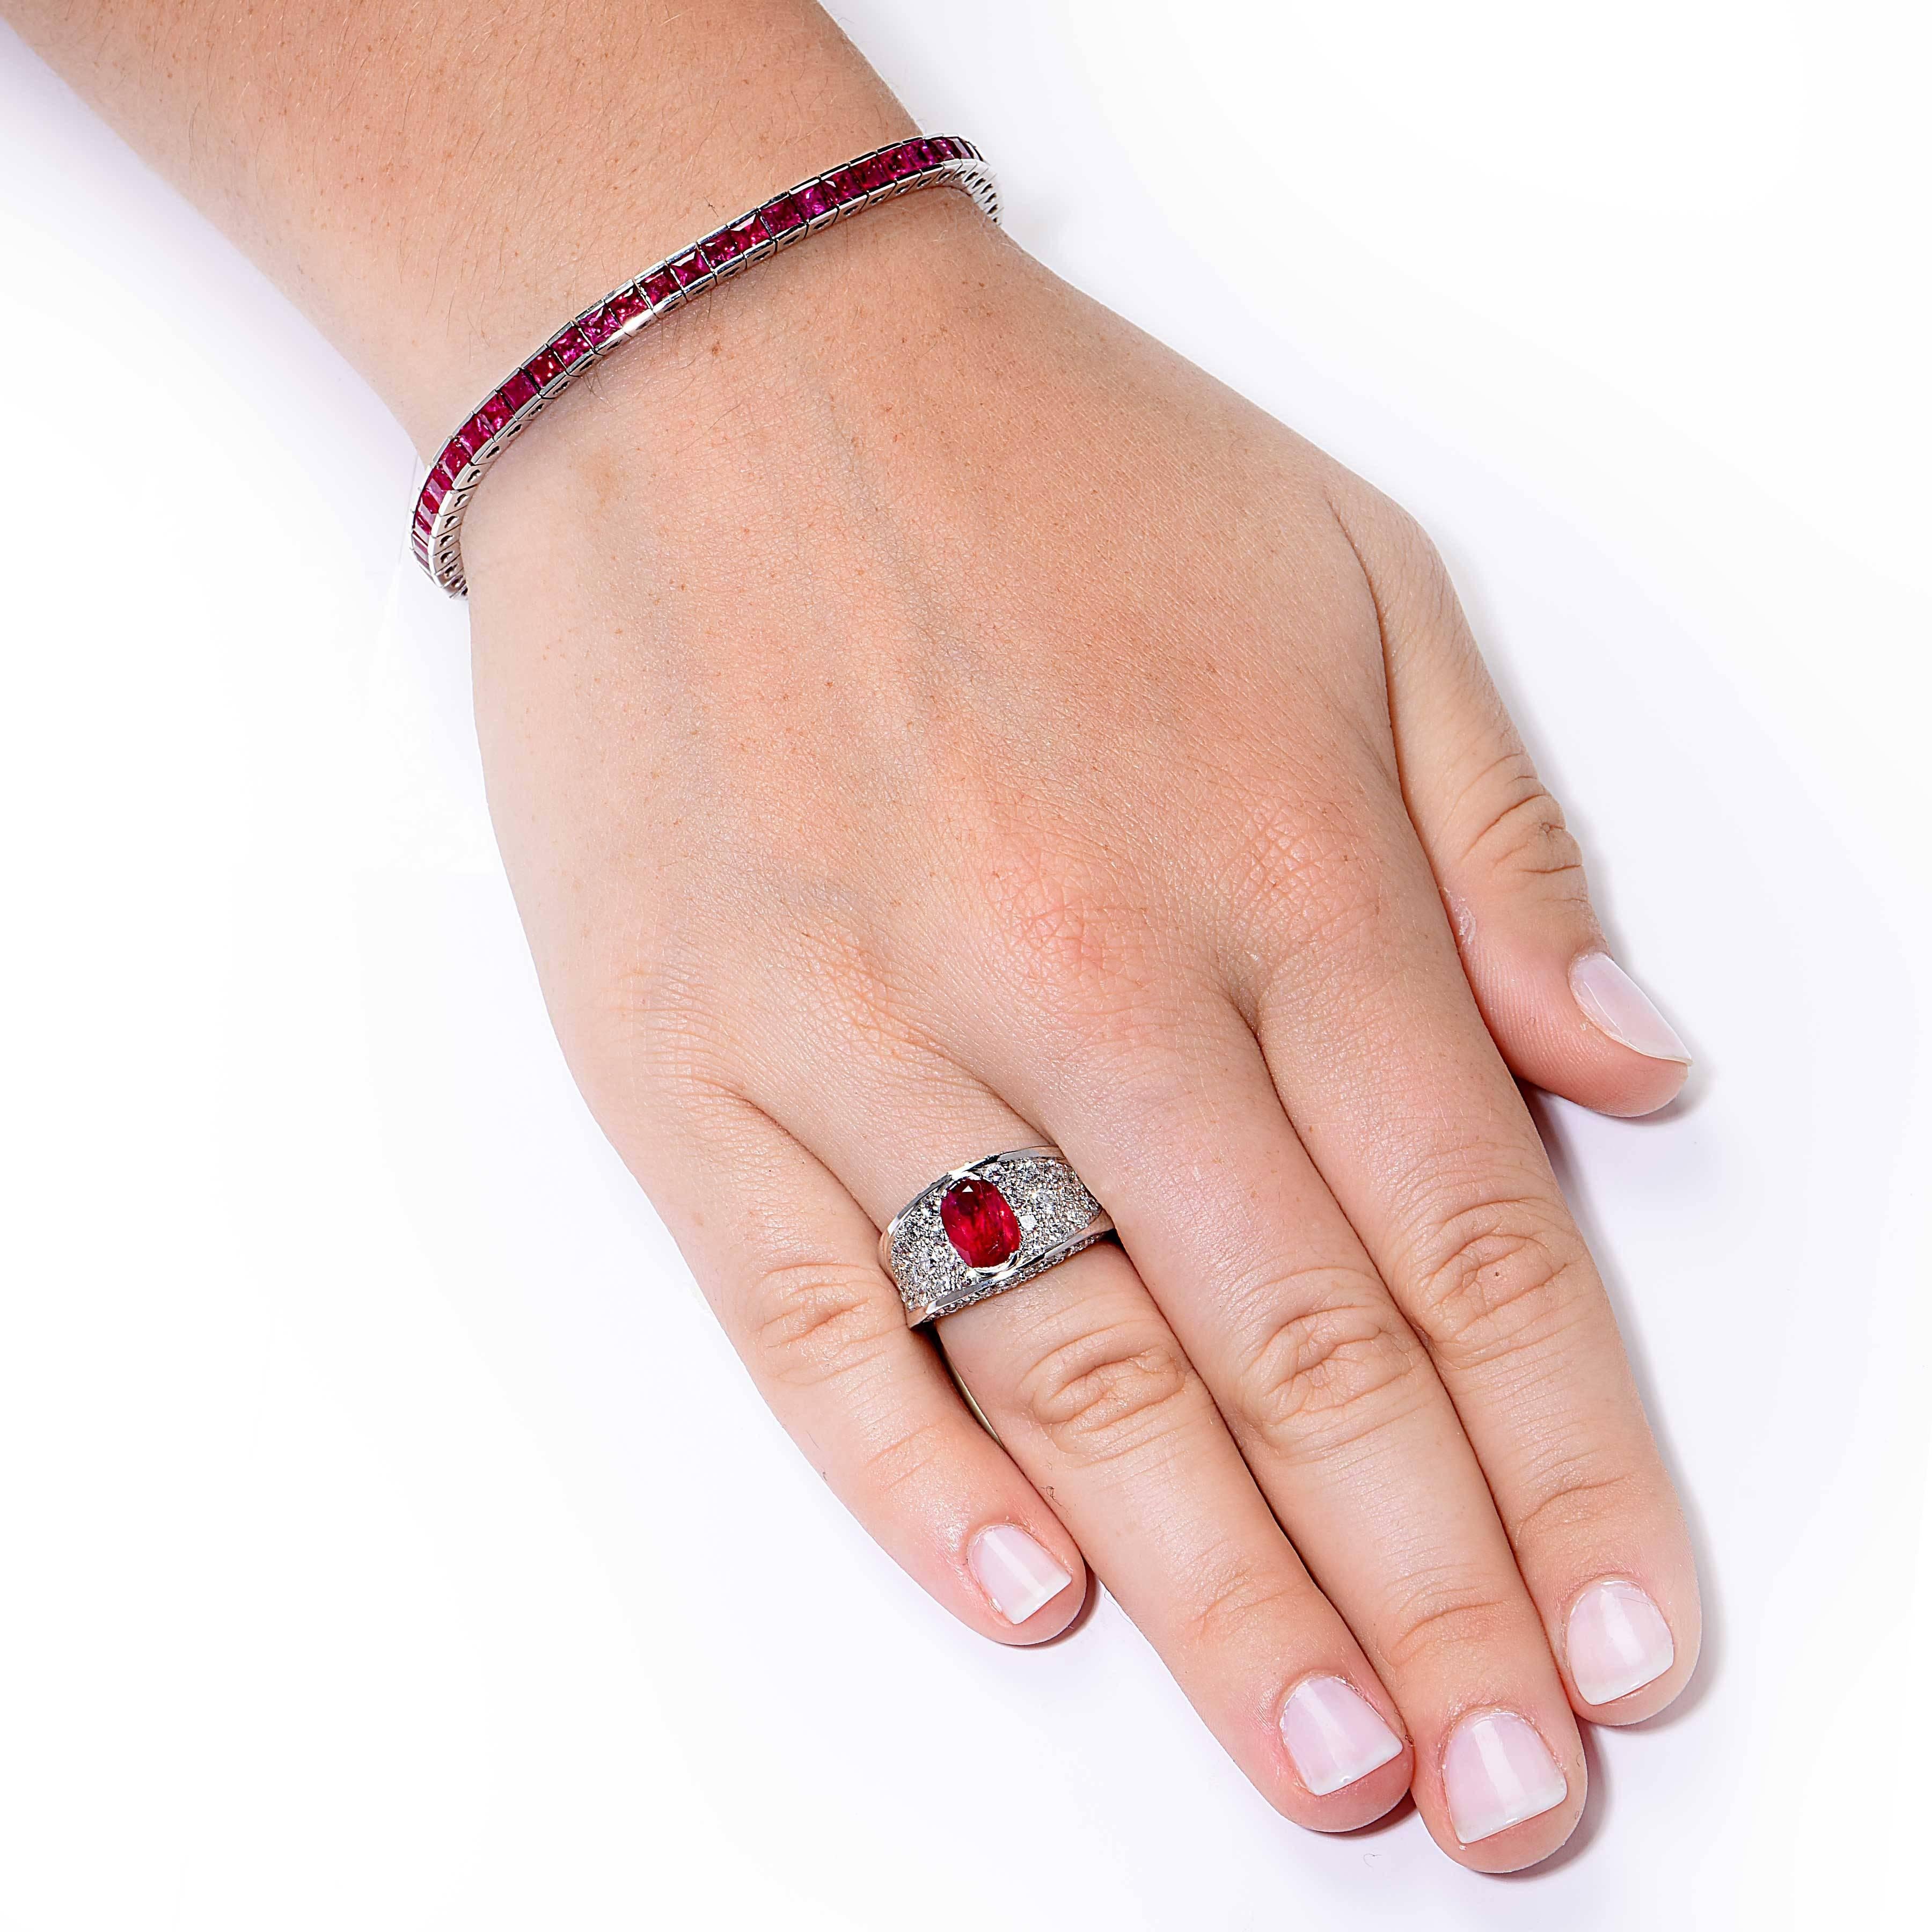 This beautiful ruby ring features a 2.35 carat oval cut natural ruby and round brilliant cut diamonds with an estimated total weight of 1.75 carats.

Ring Size: 6 (can be sized)
Metal Type: 18 KT White Gold  (stamped and/or tested)
Metal Weight: 9.7